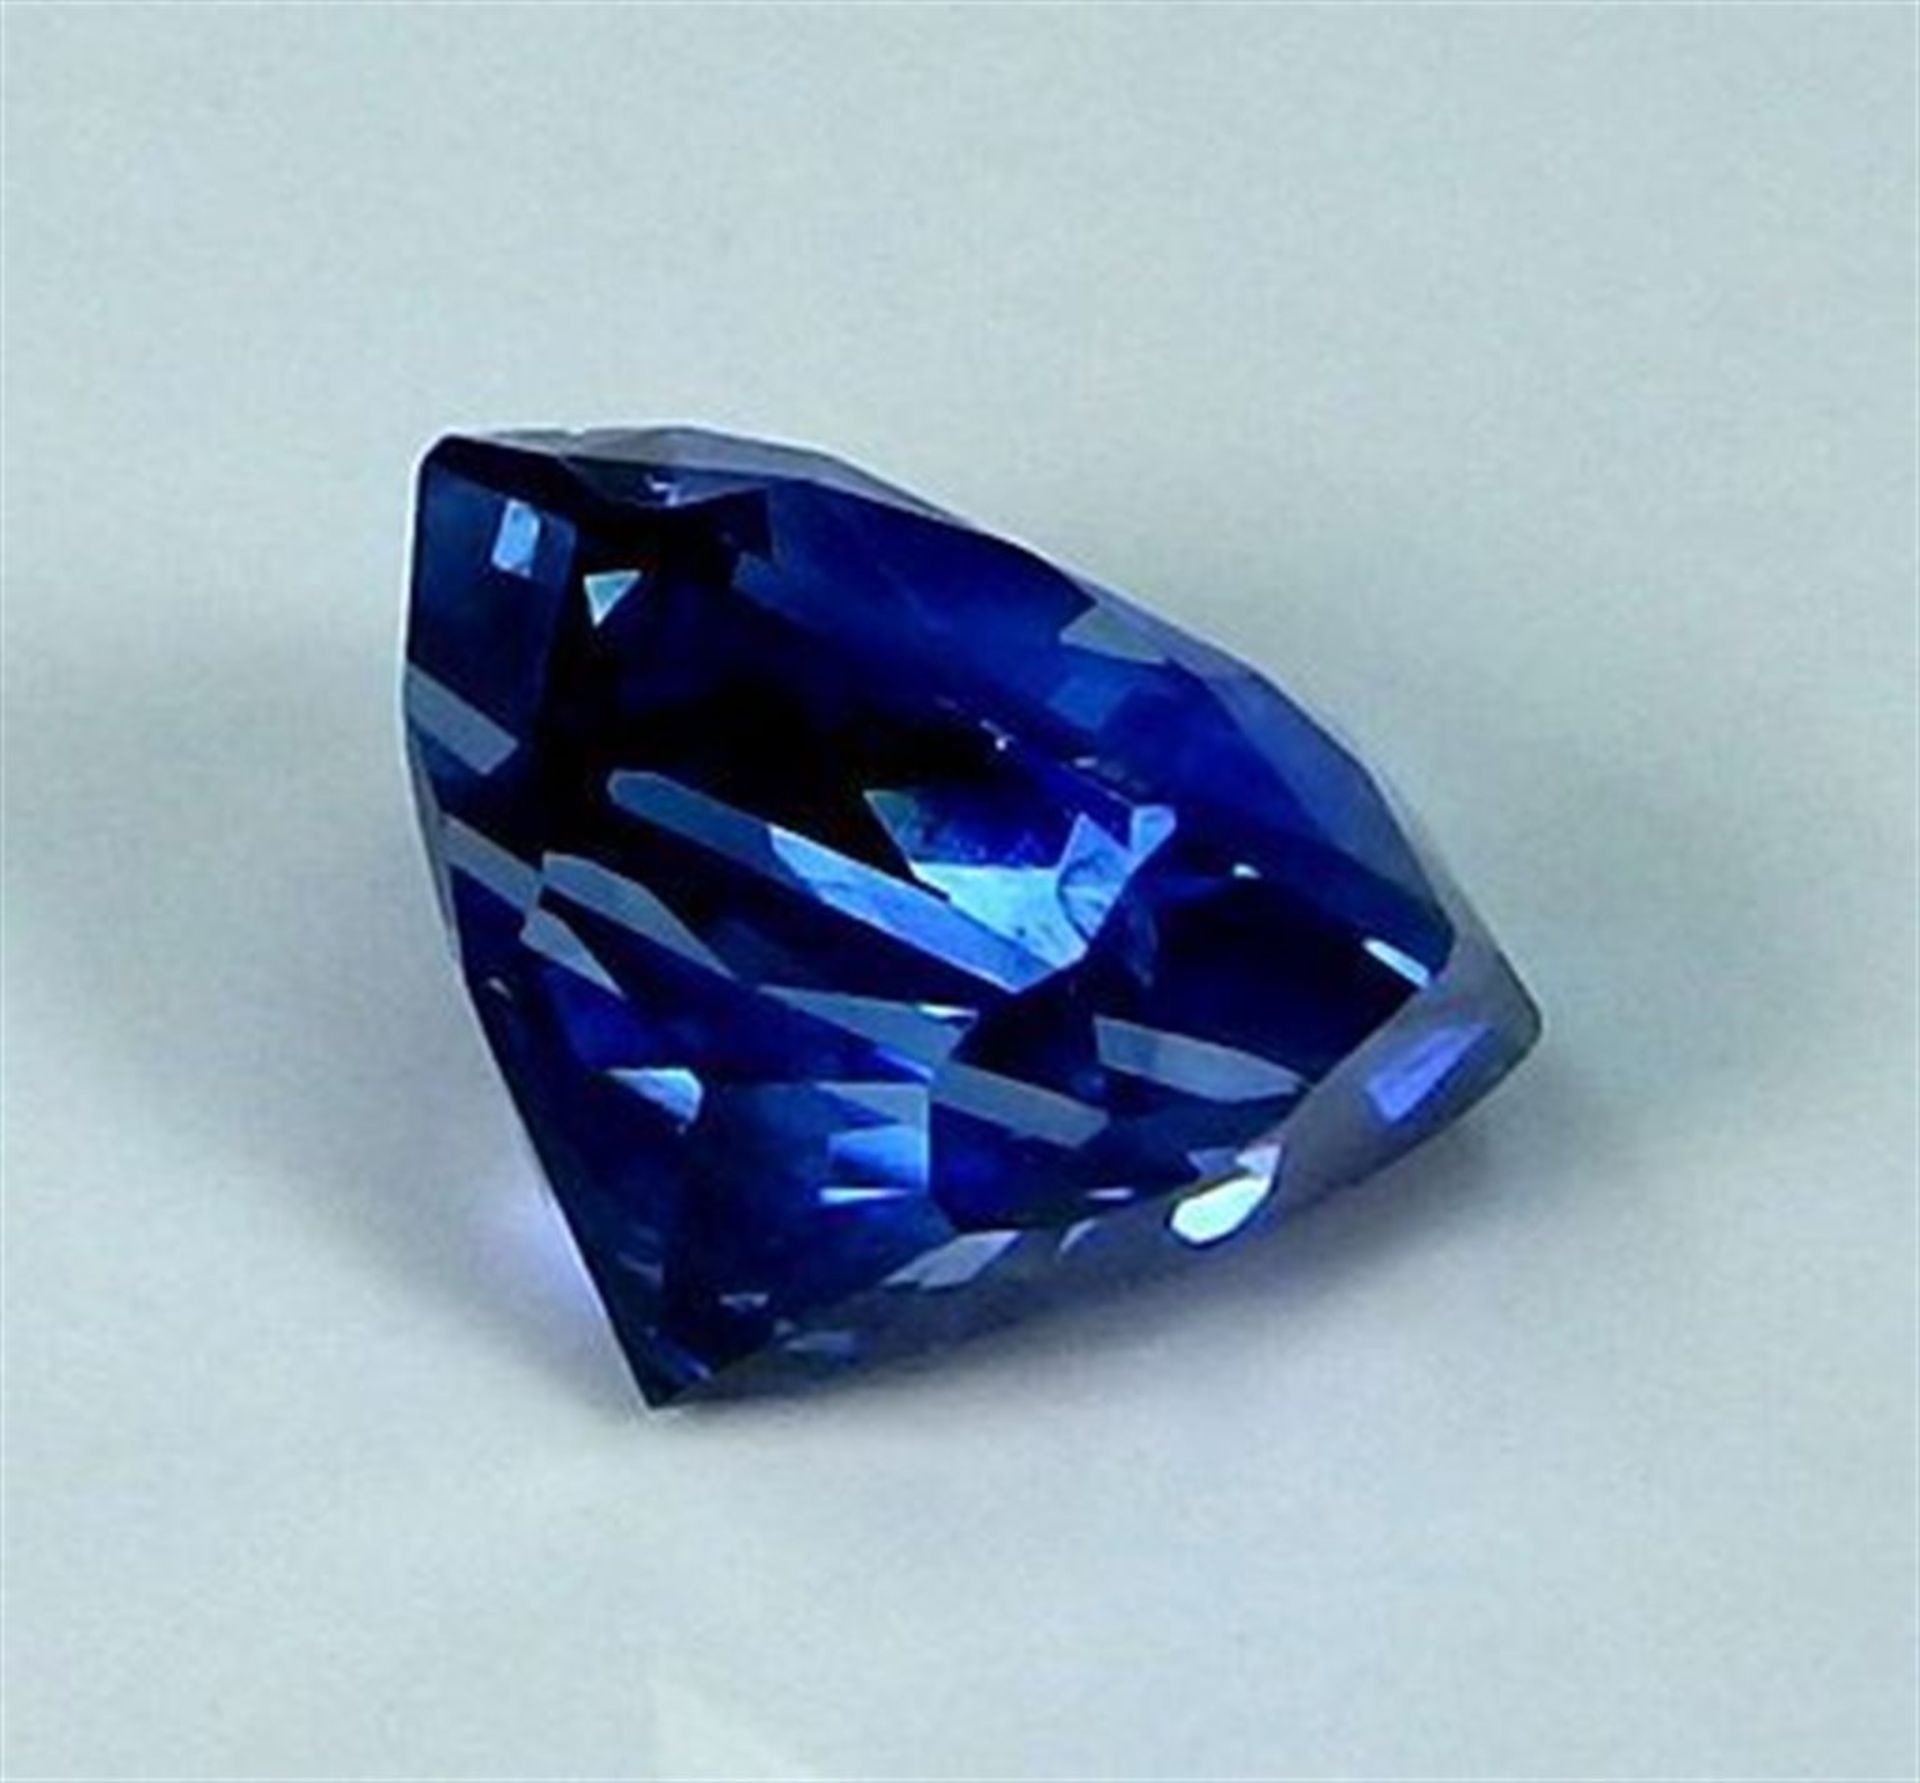 GIA Certified 3.51 ct. Untreated Blue Sapphire - BURMA - Image 5 of 7